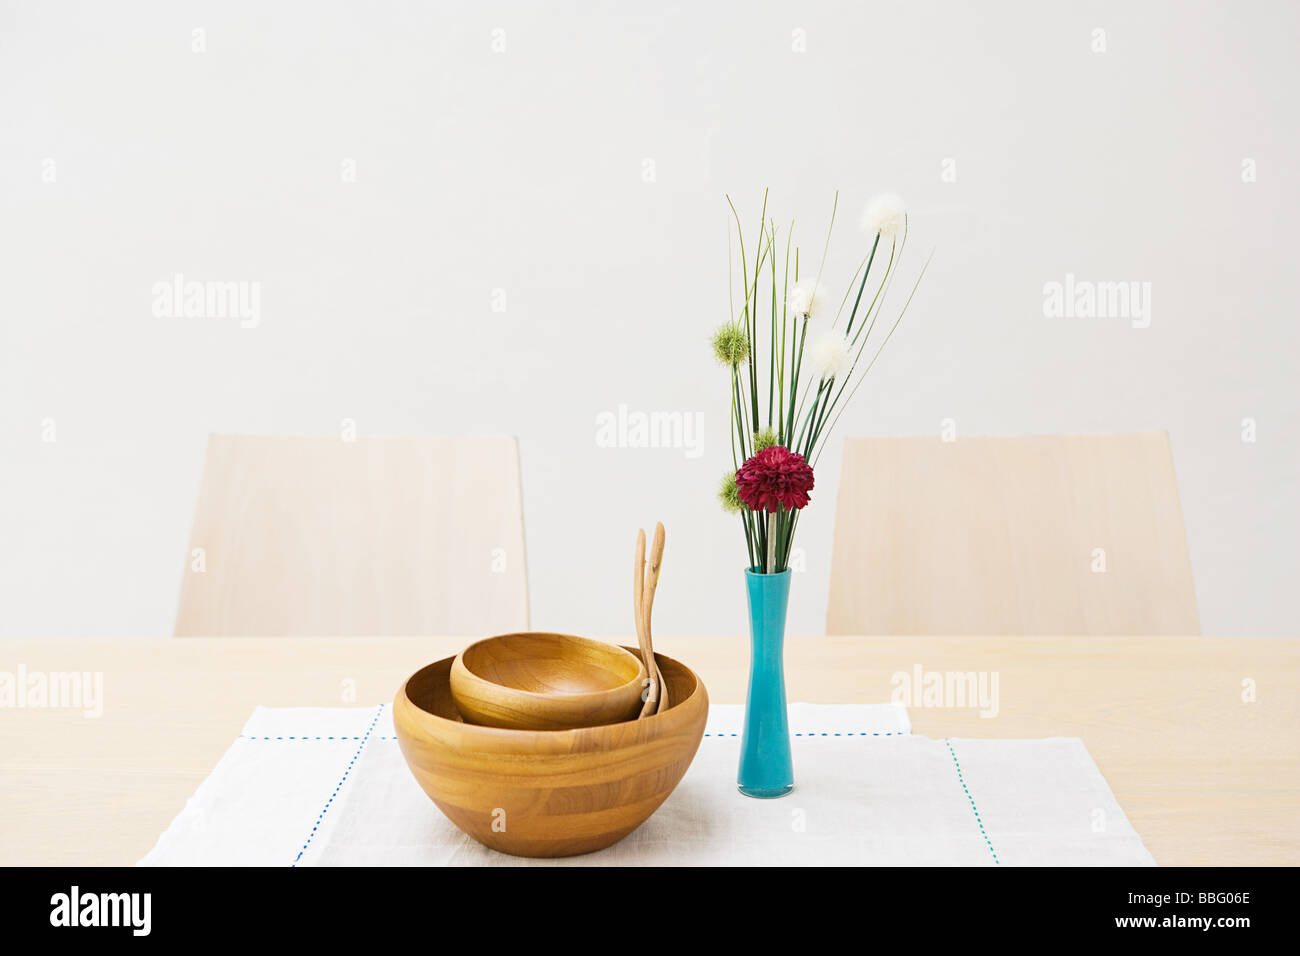 Vase of flowers and bowls on a table Stock Photo